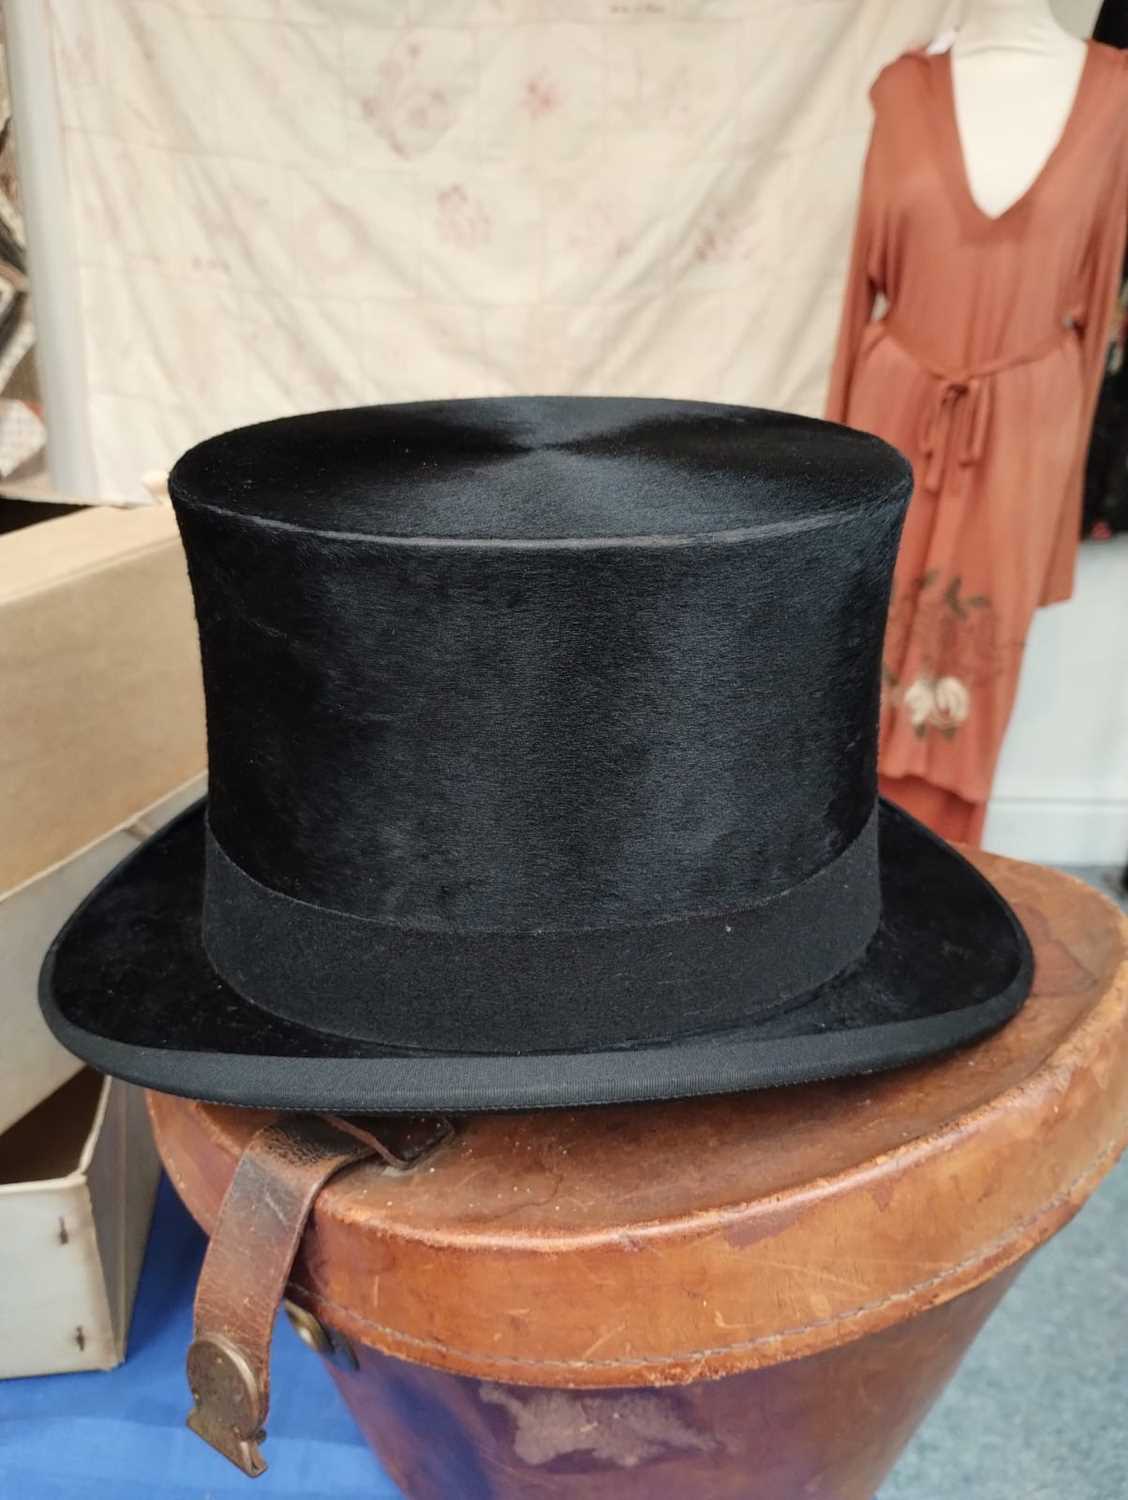 Black Silk Top Hat in Fitted Leather Hat Case with lime green cotton lining 20.5cm by 16.5cm, - Image 5 of 16